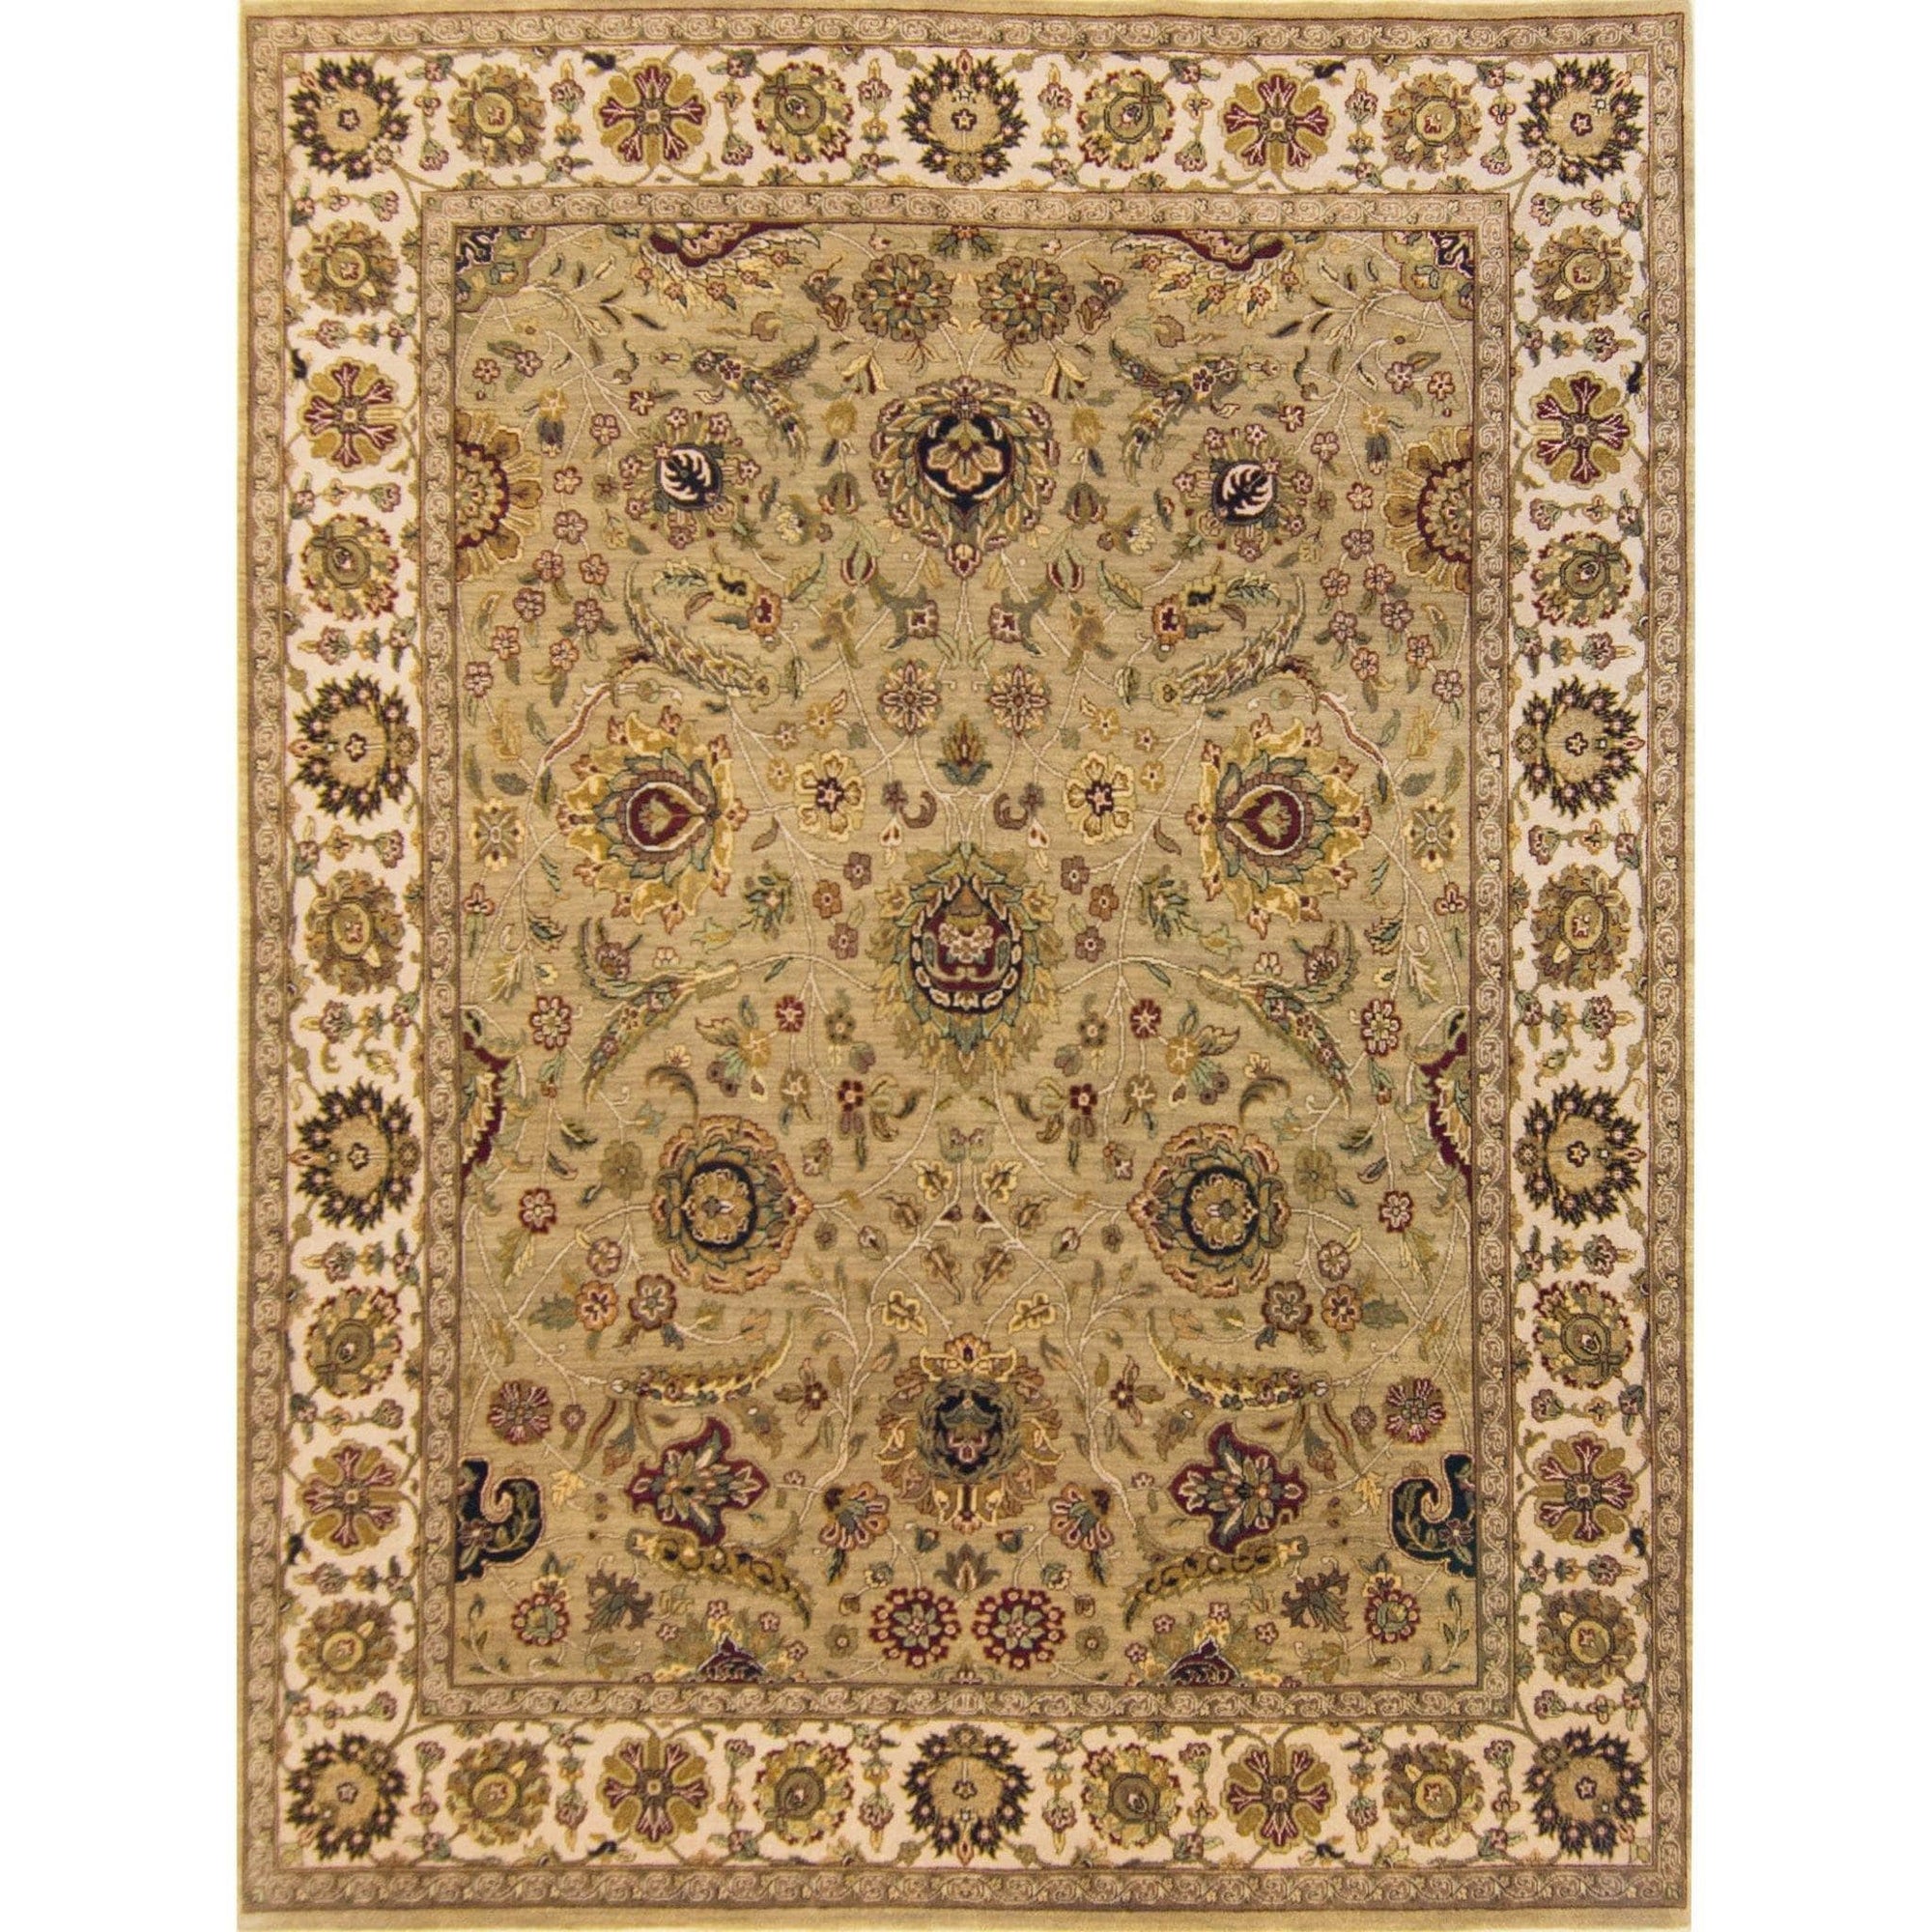 Fine Hand-knotted Wool Large Rug 245cm x 303cm